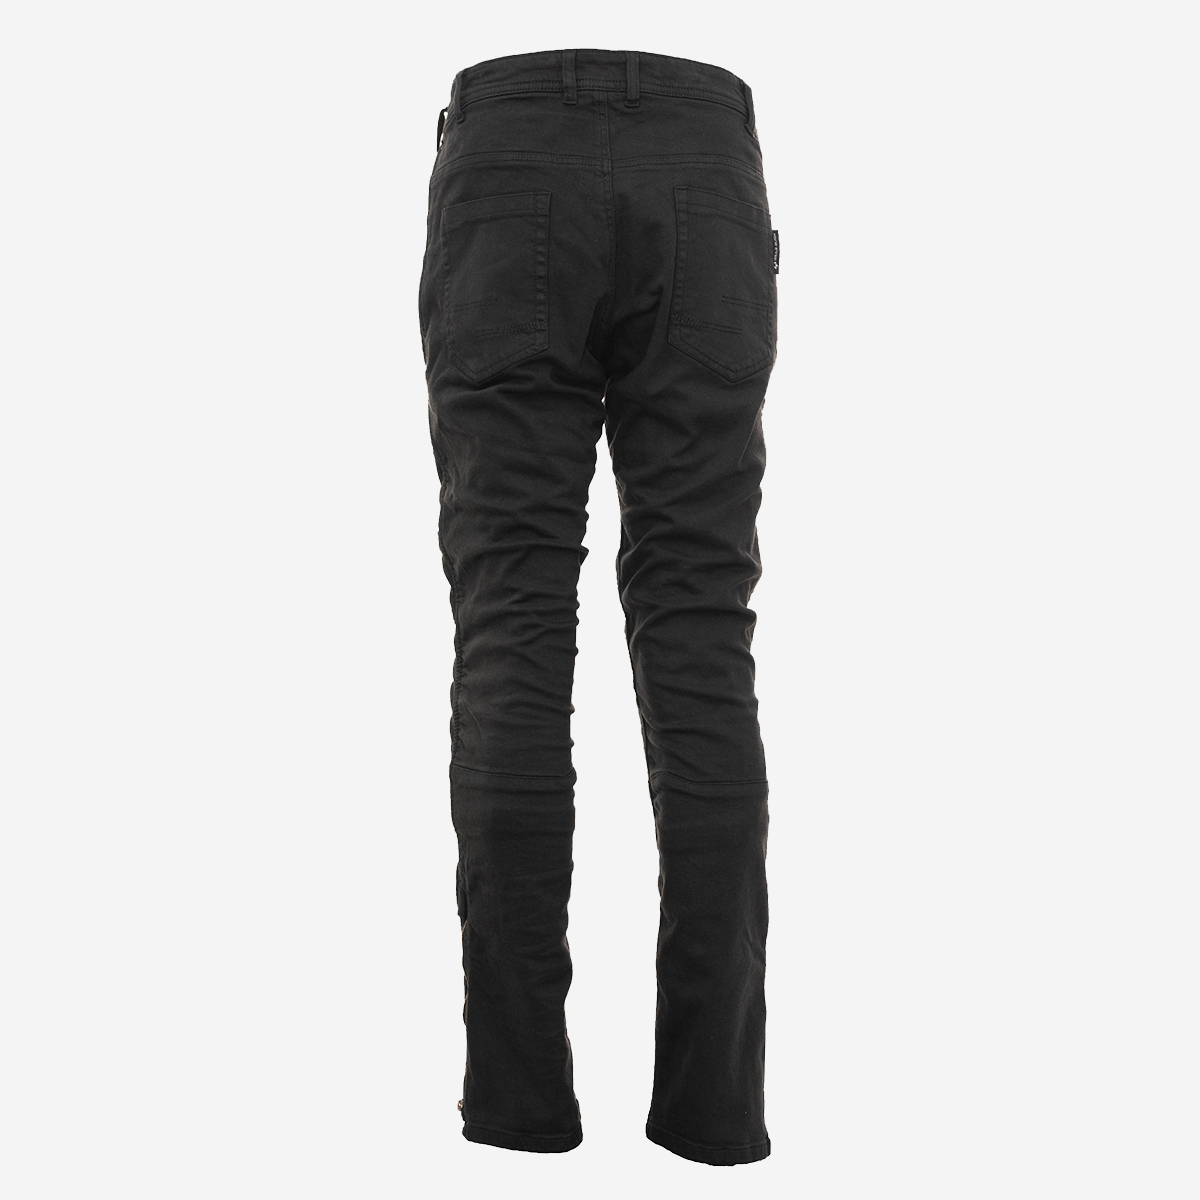 Buy SELECTED Charcoal Grey Slim Cargo Trousers - Trousers for Men 1125225 |  Myntra